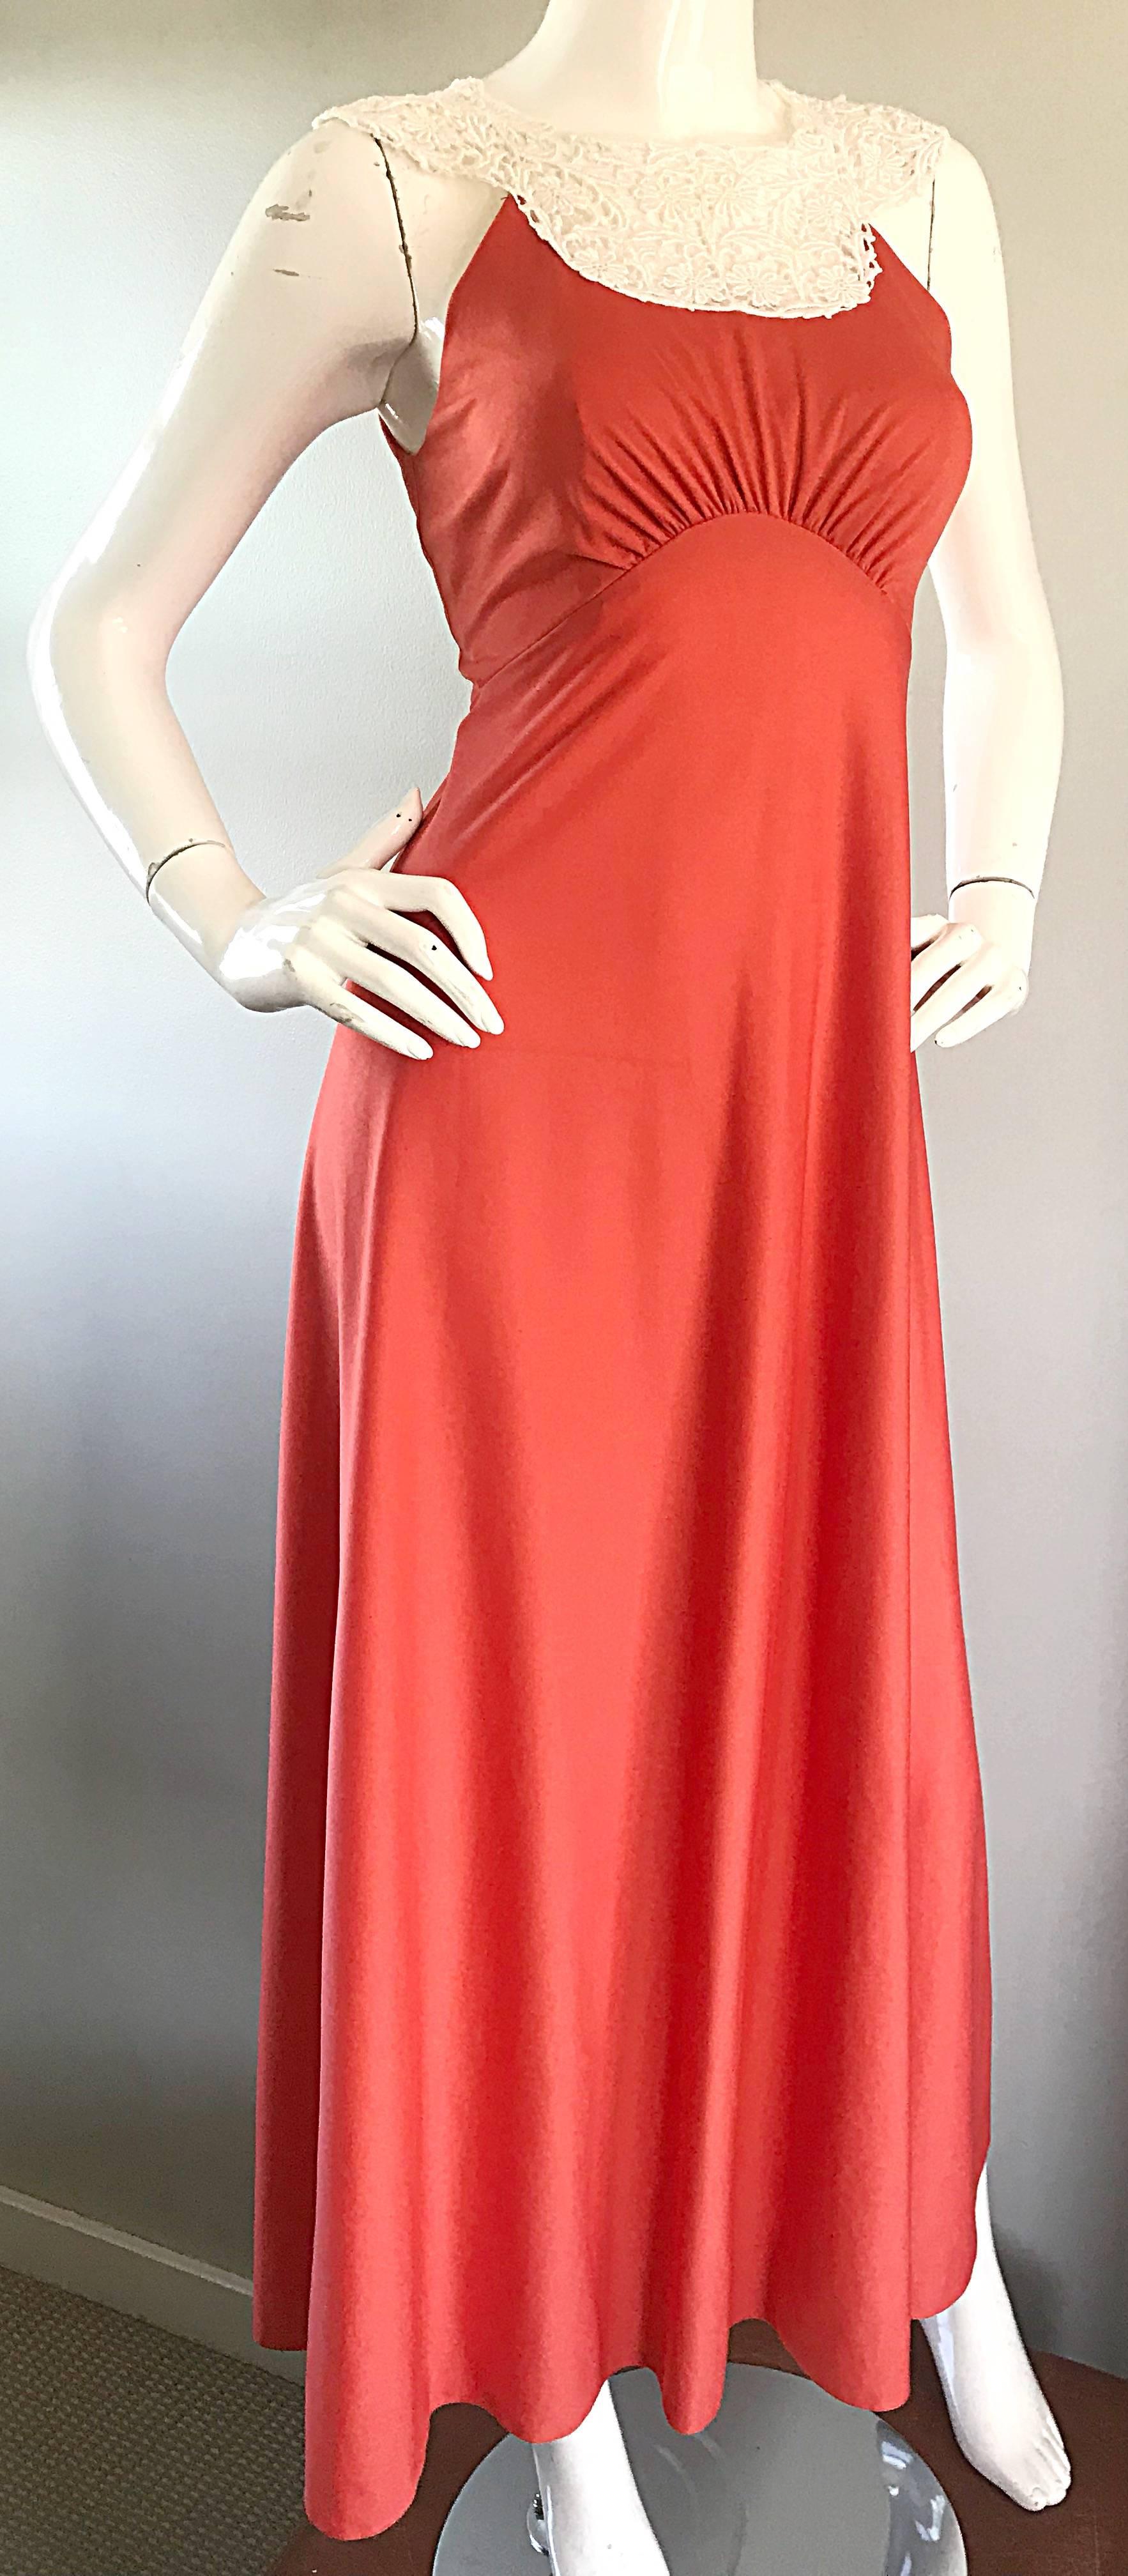 1970s Coral Salmon Pink Jersey + Crochet Lace Collar 70s Vintage Maxi Dress For Sale 1